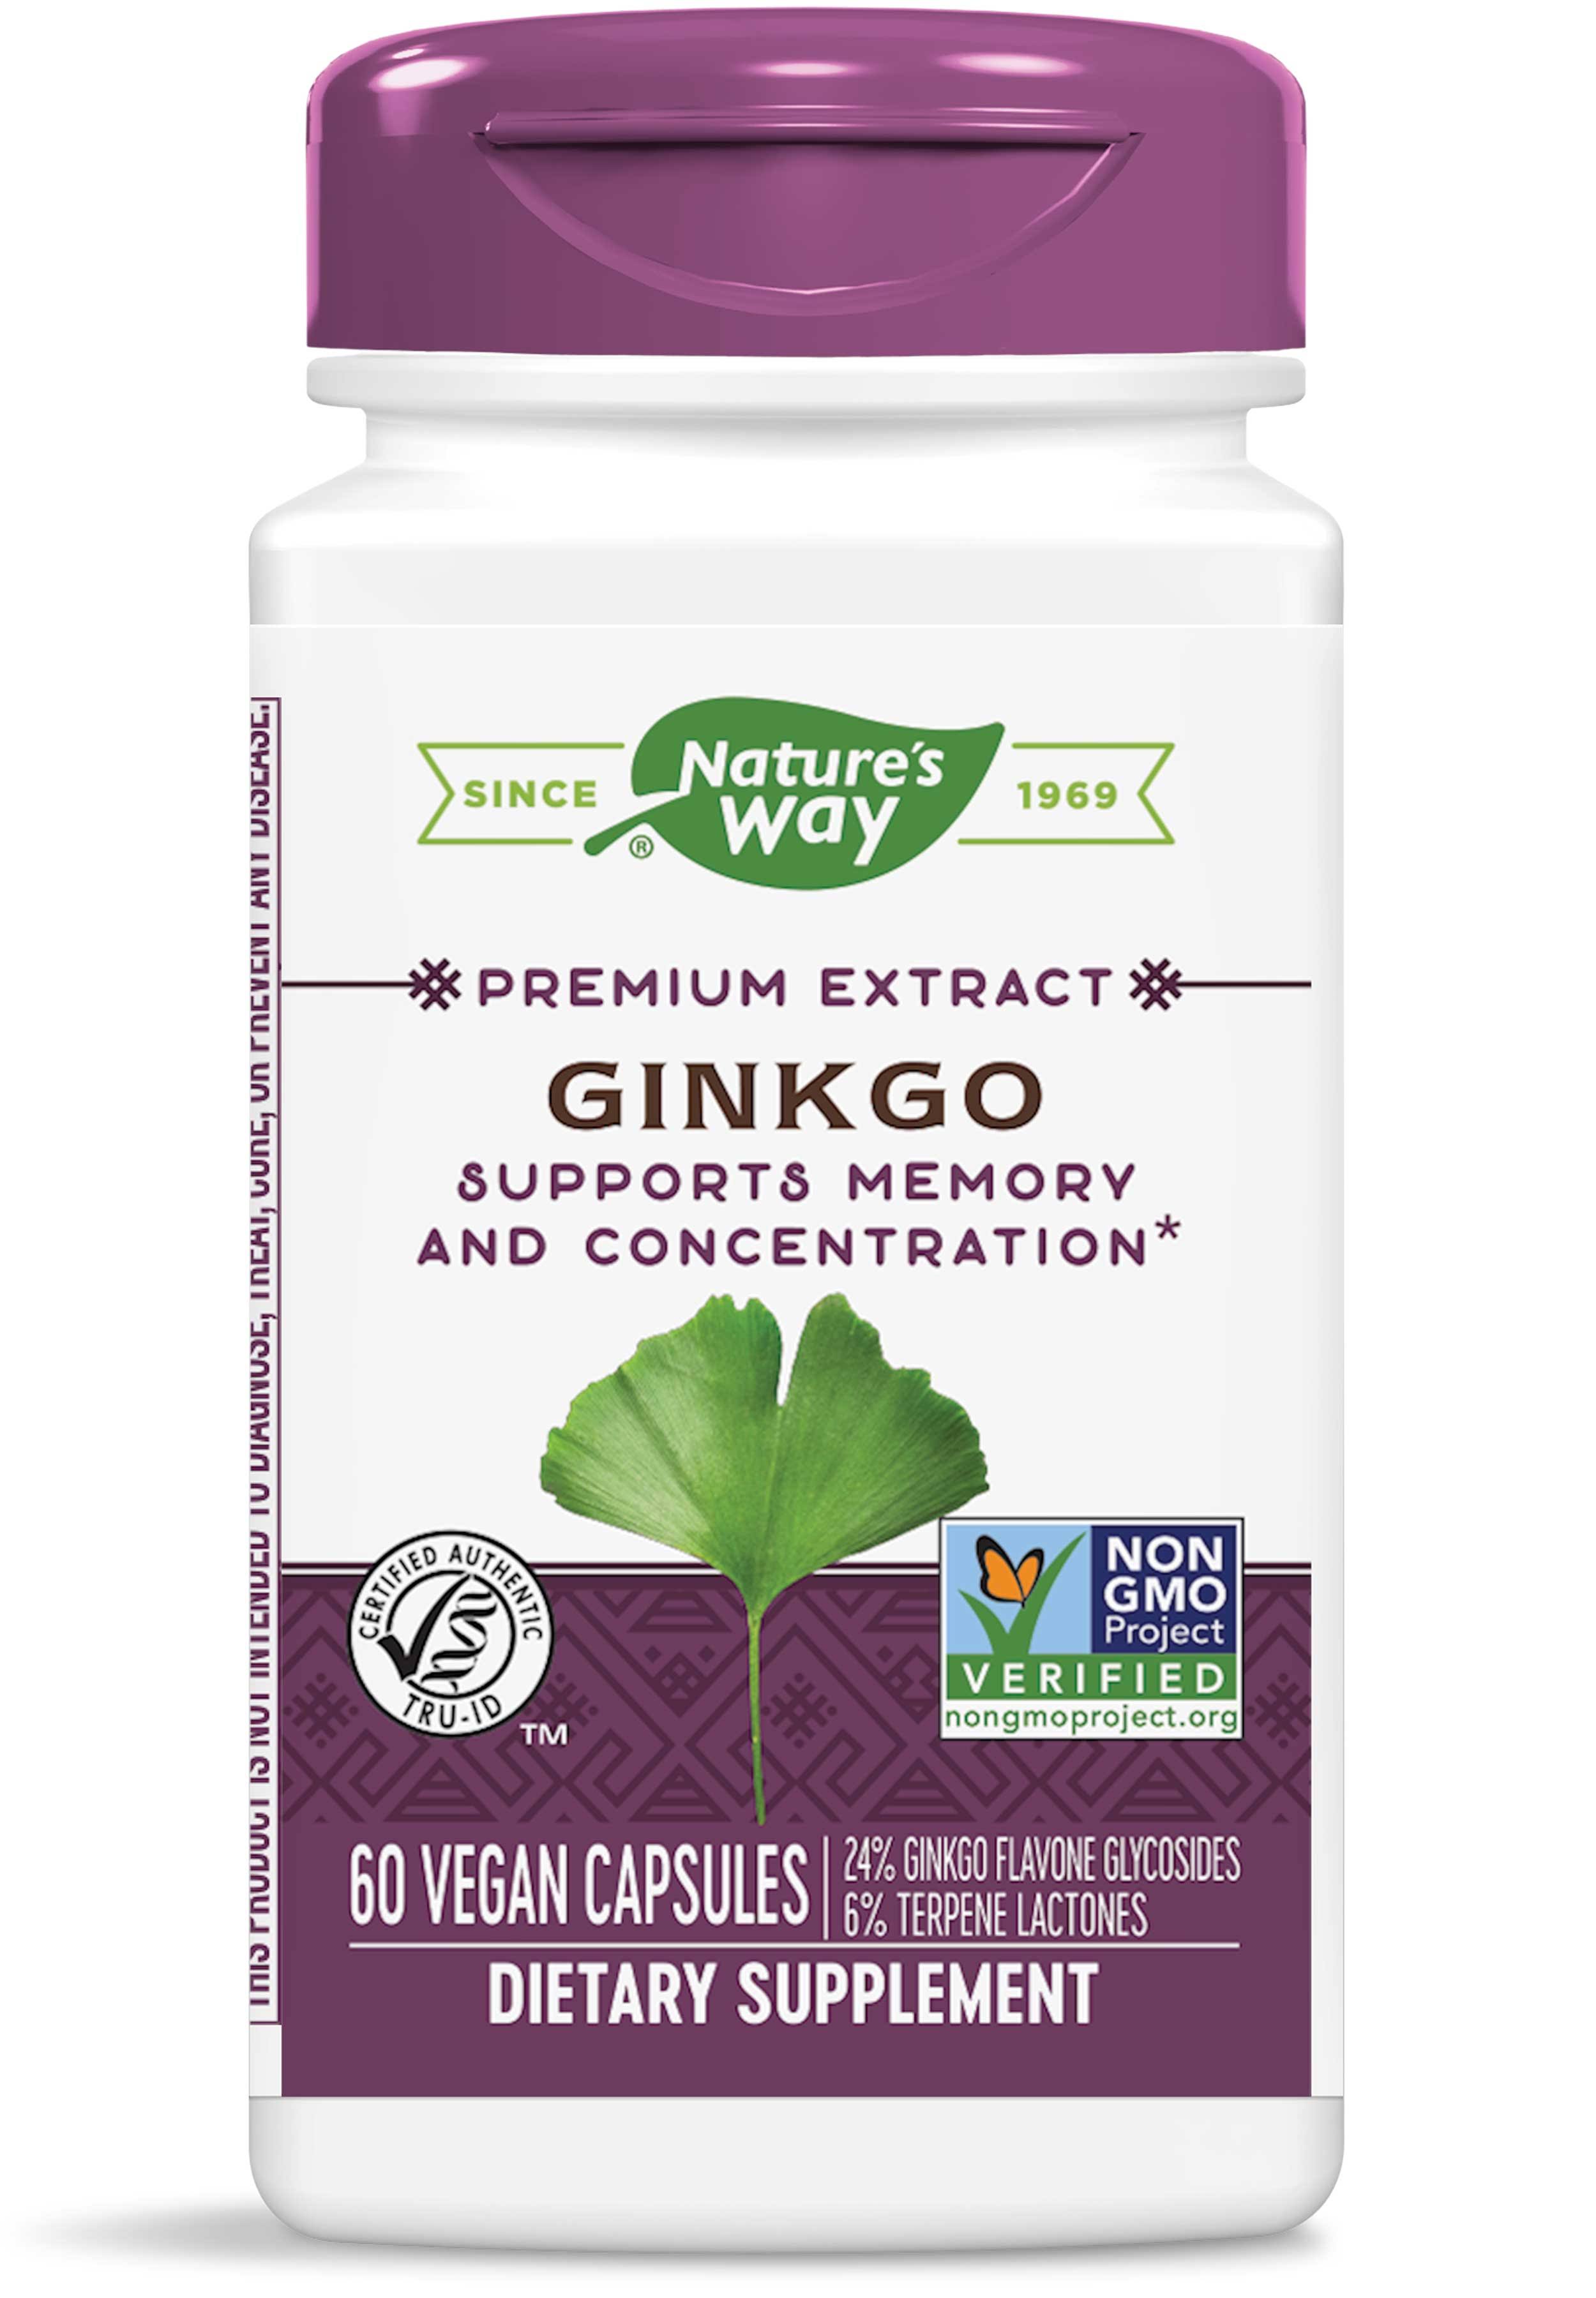 Nature's Way Ginkgo Standardised Extract - 60 Capsules